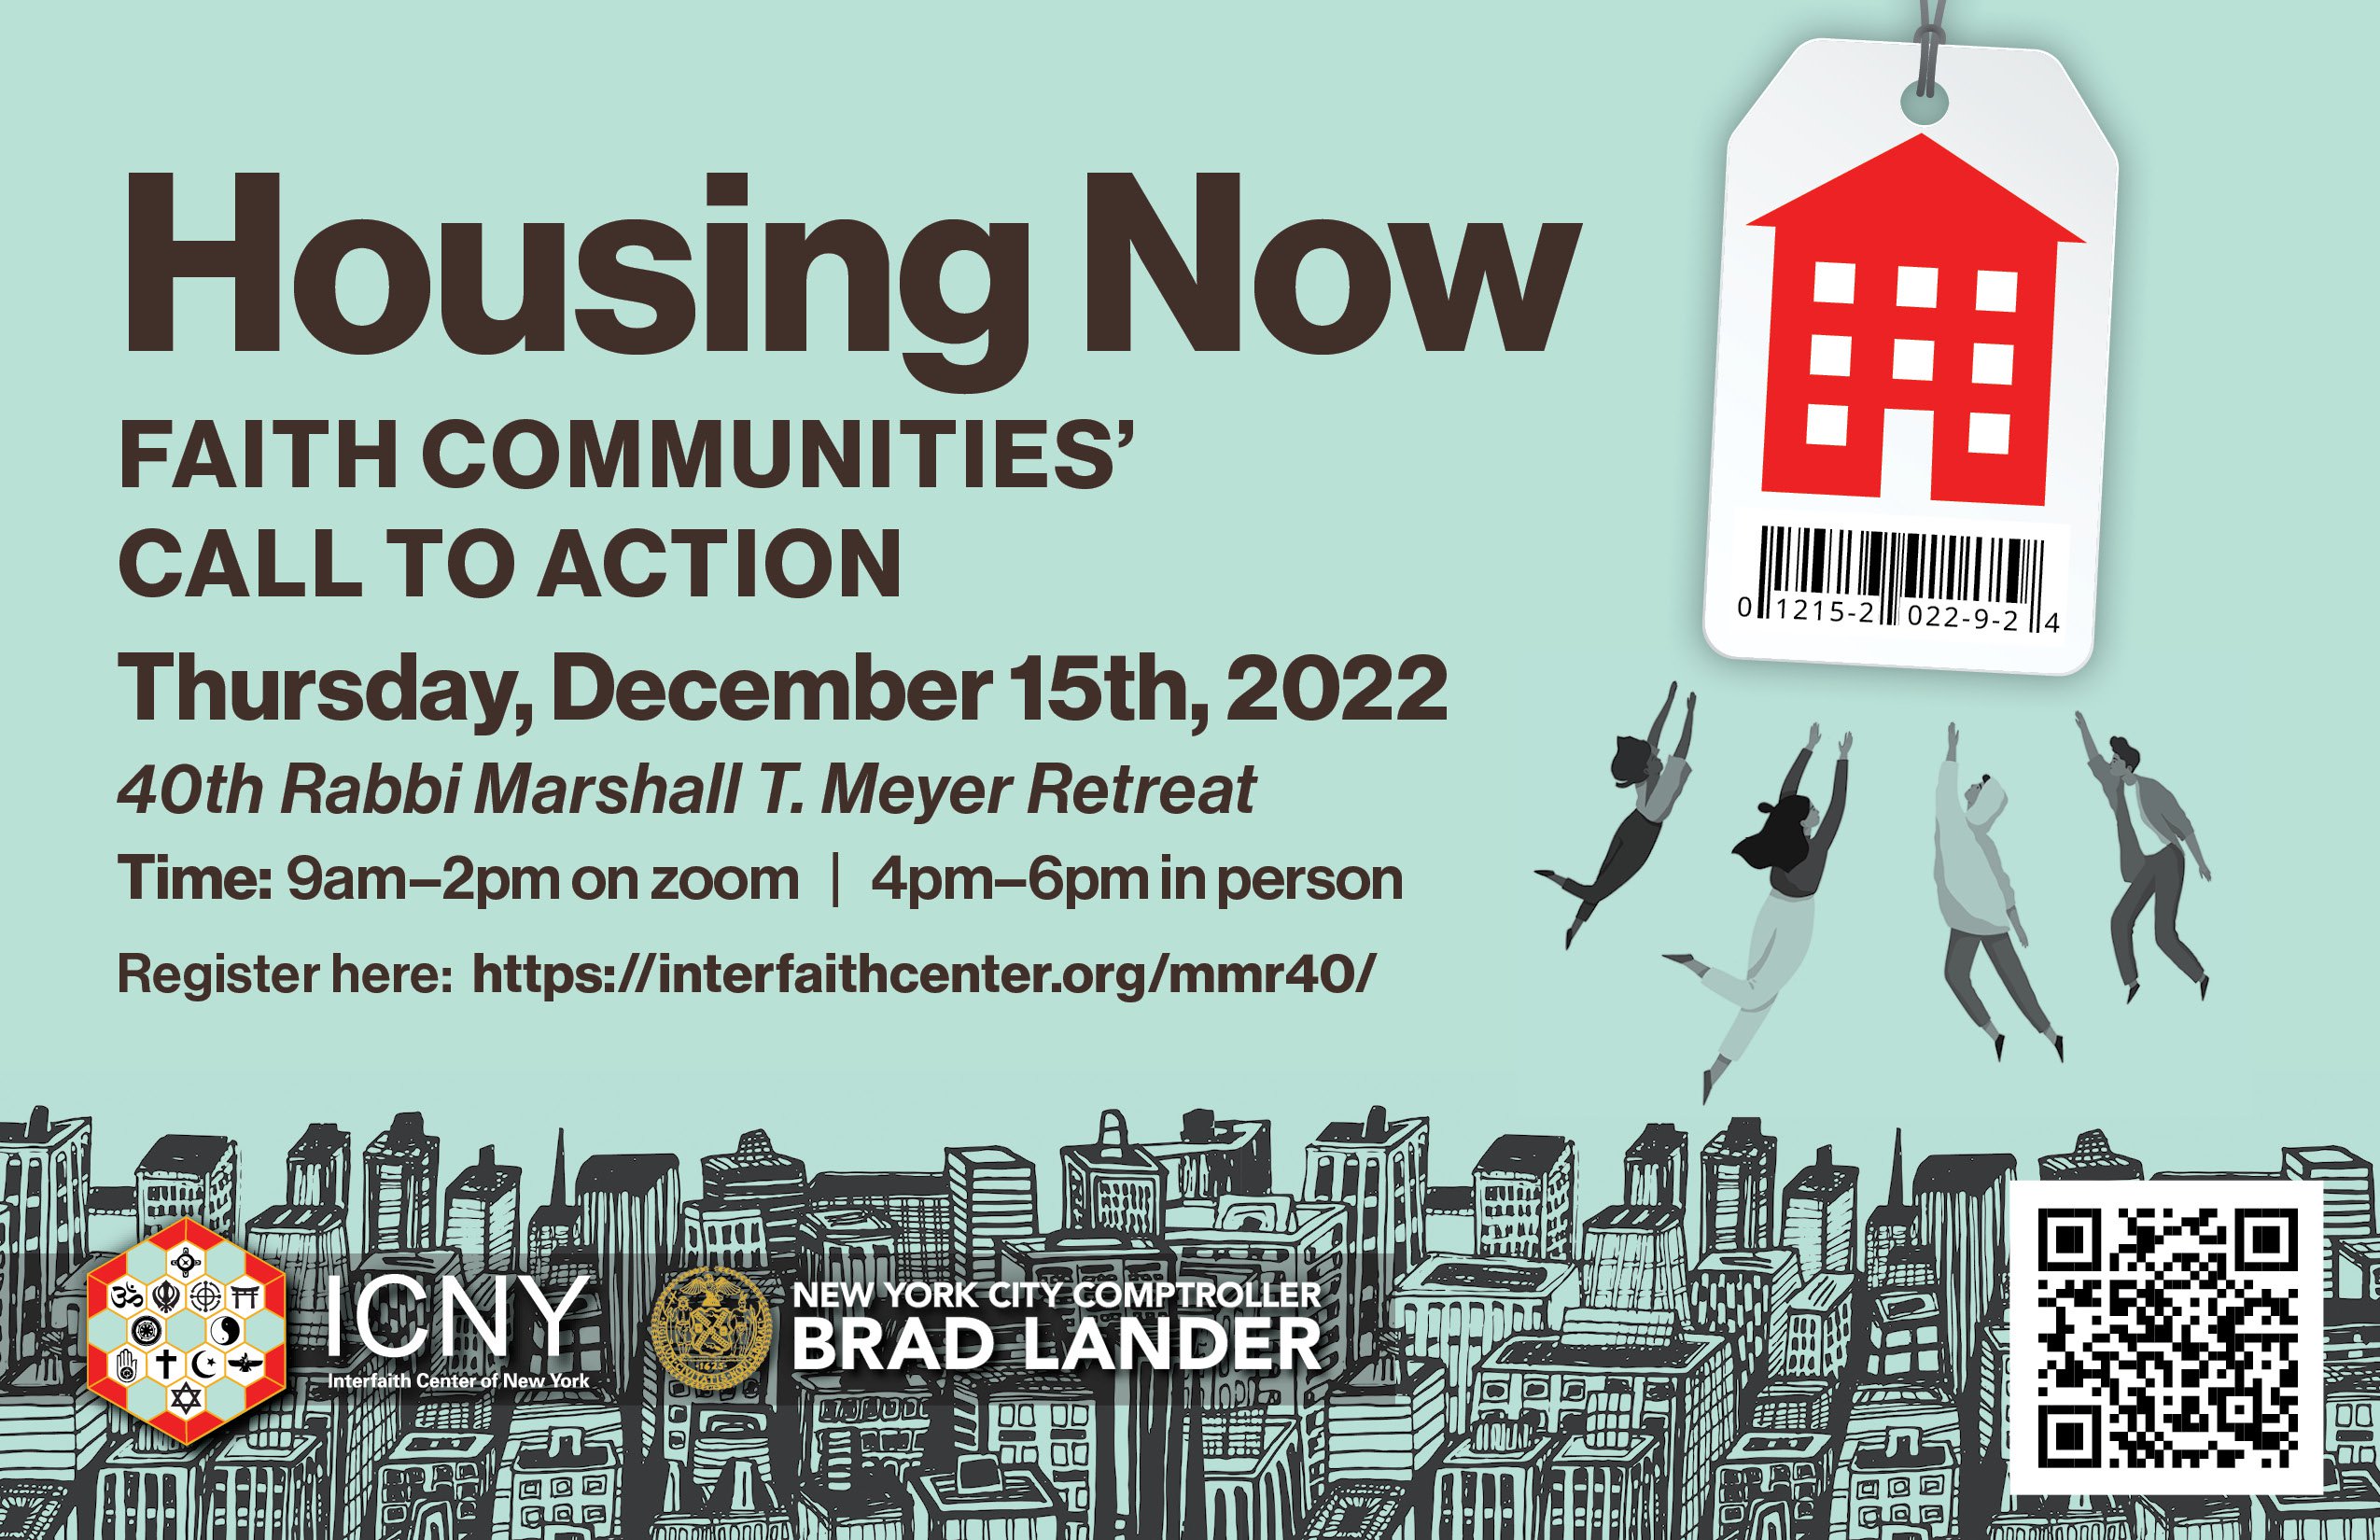 Housing Now: Faith Communities’ Call to Action